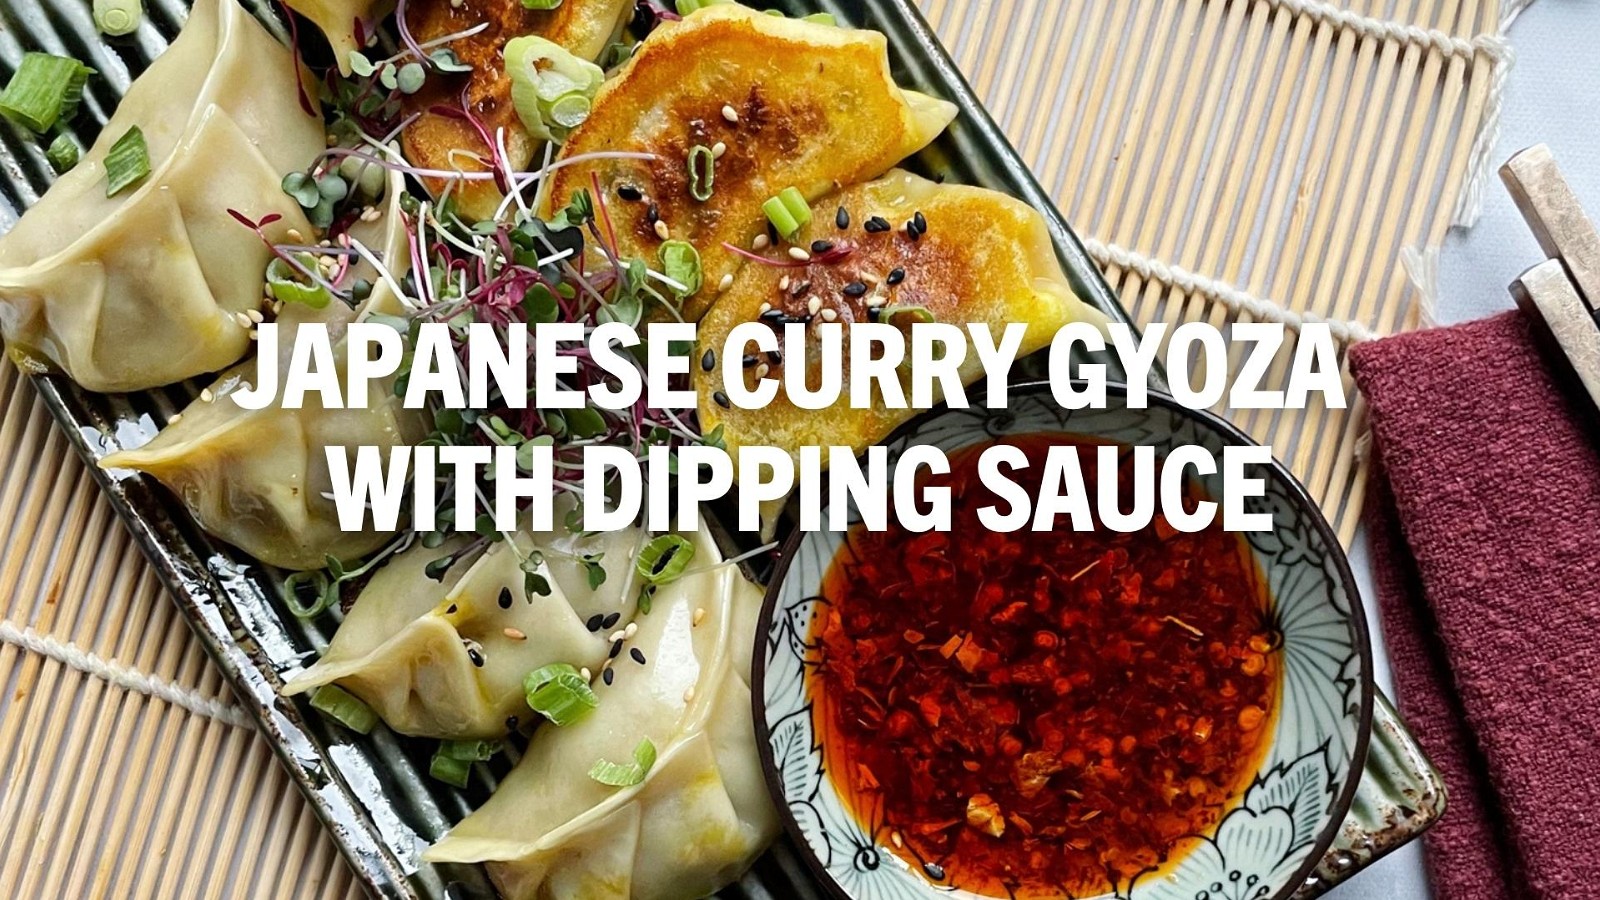 Image of Japanese Curry Gyoza with Dipping Sauce